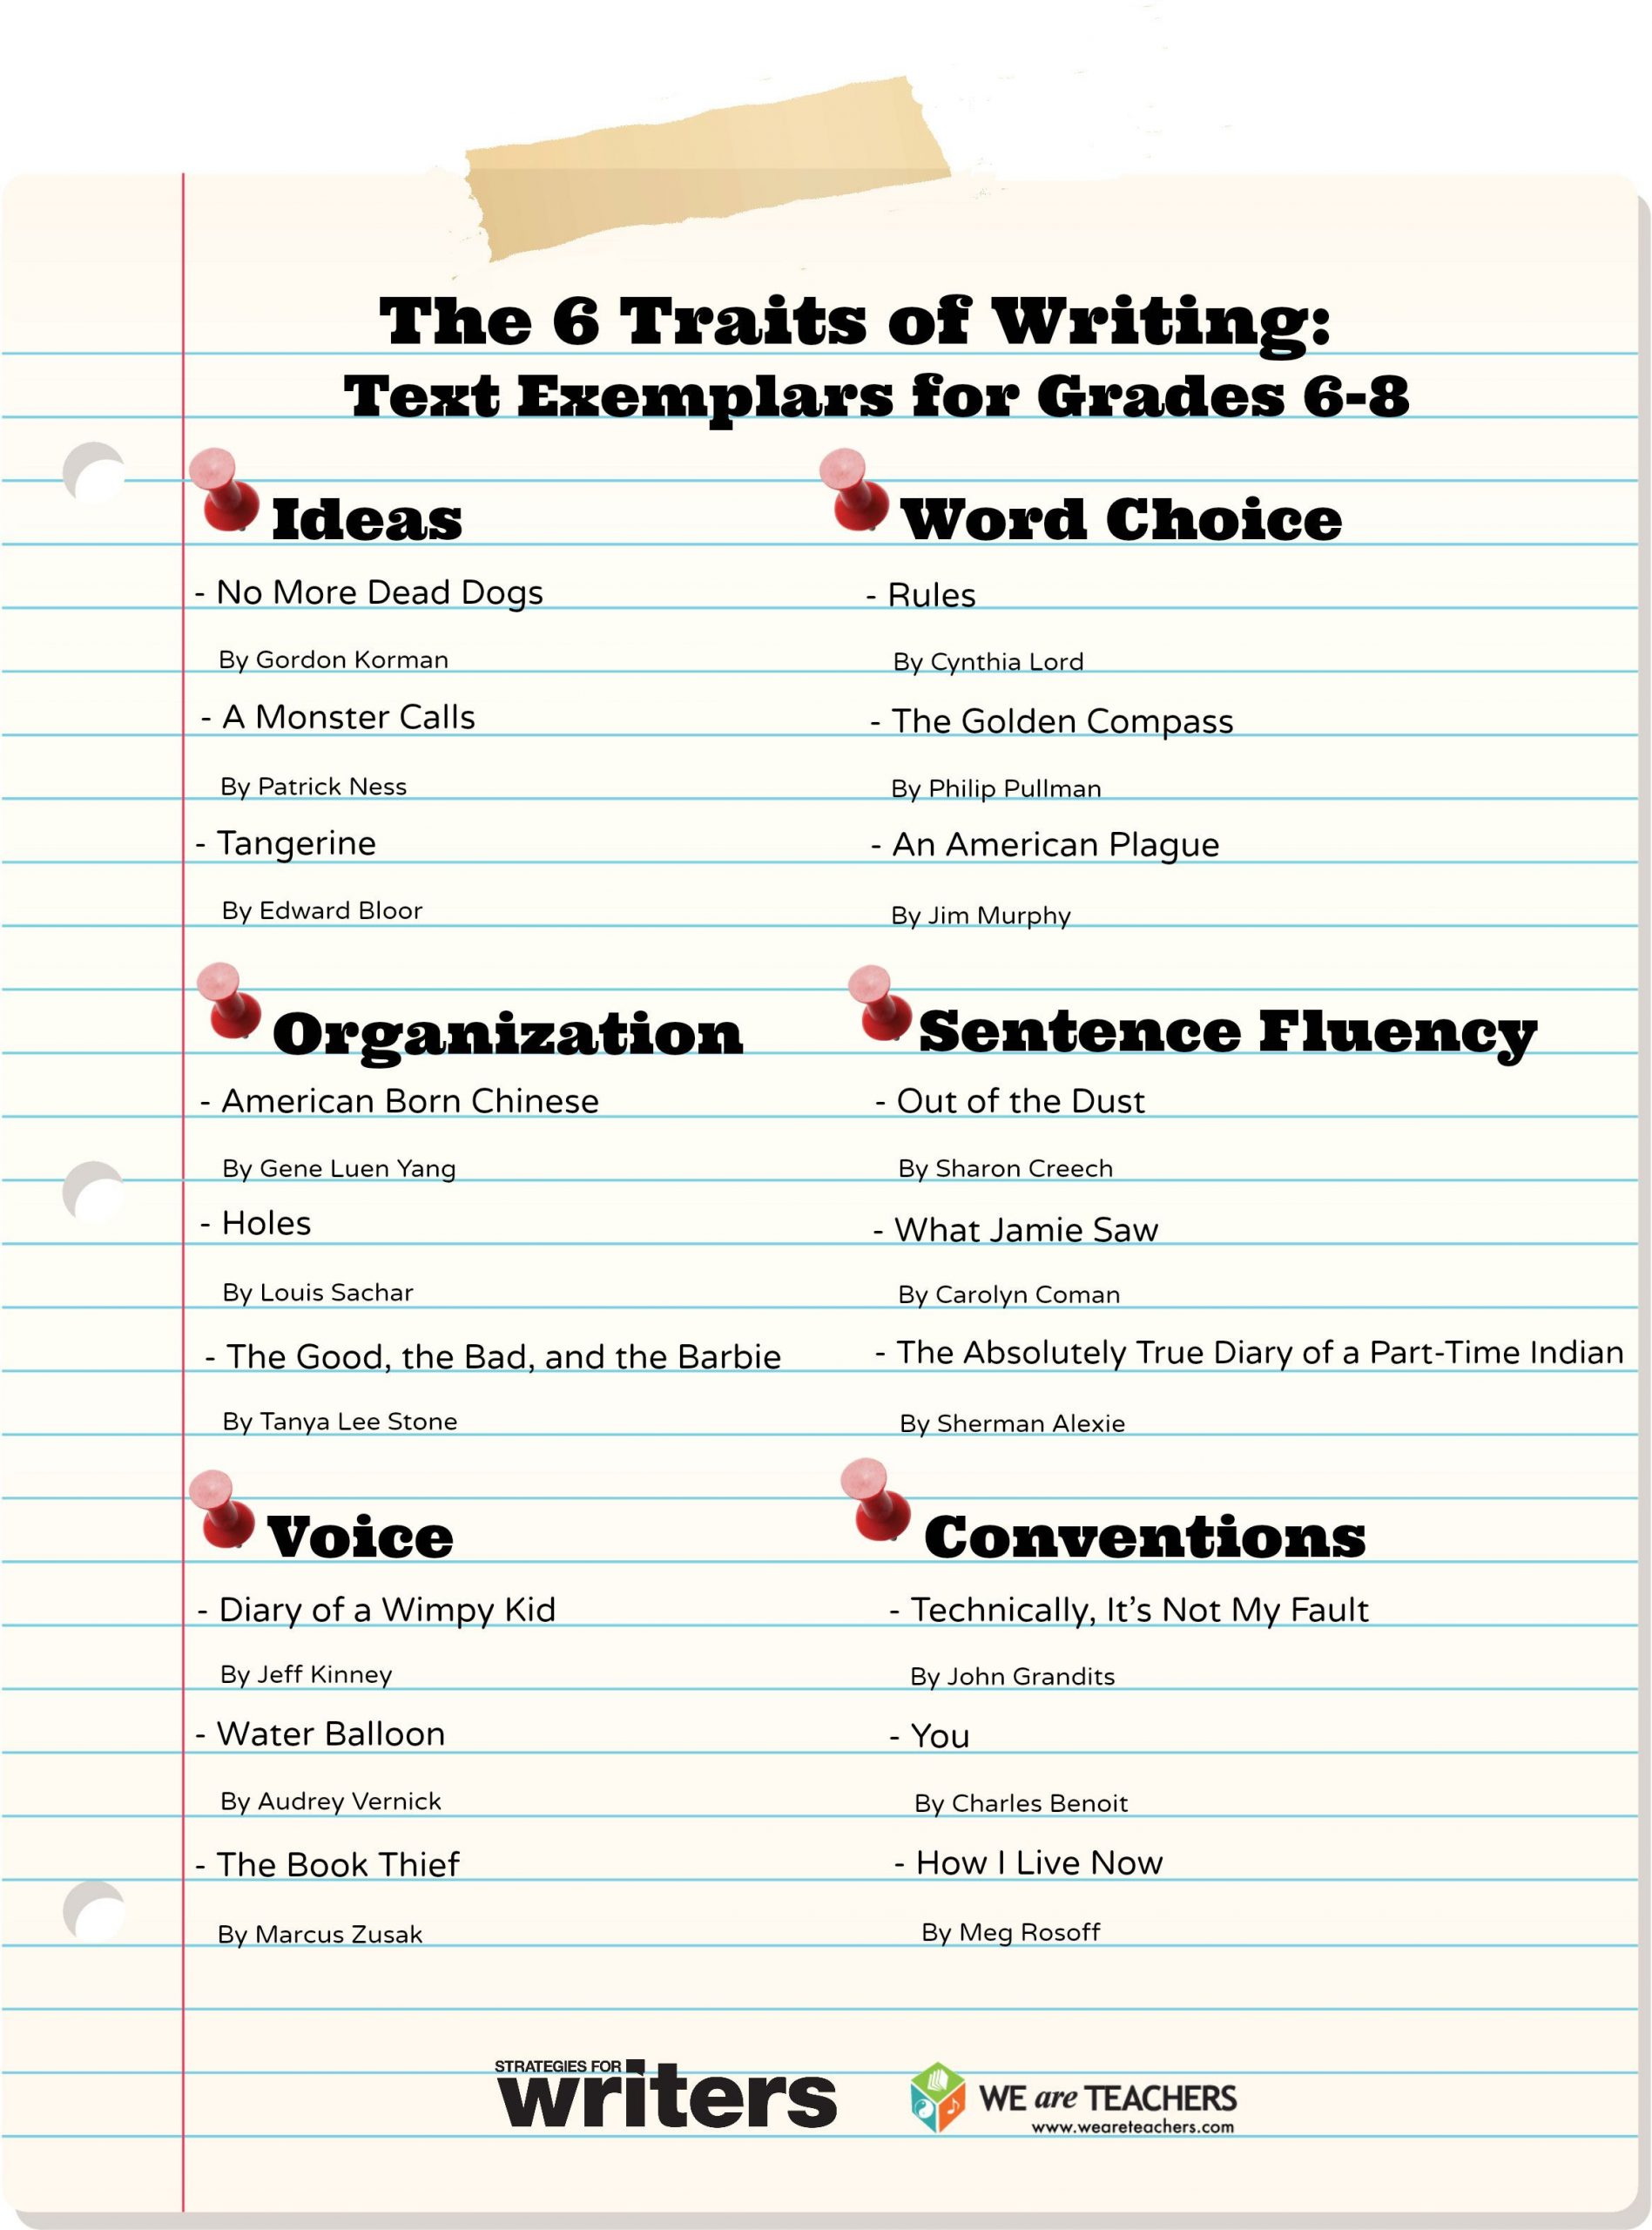 The Six Traits Of Writing: Text Exemplars For Grades 6-8